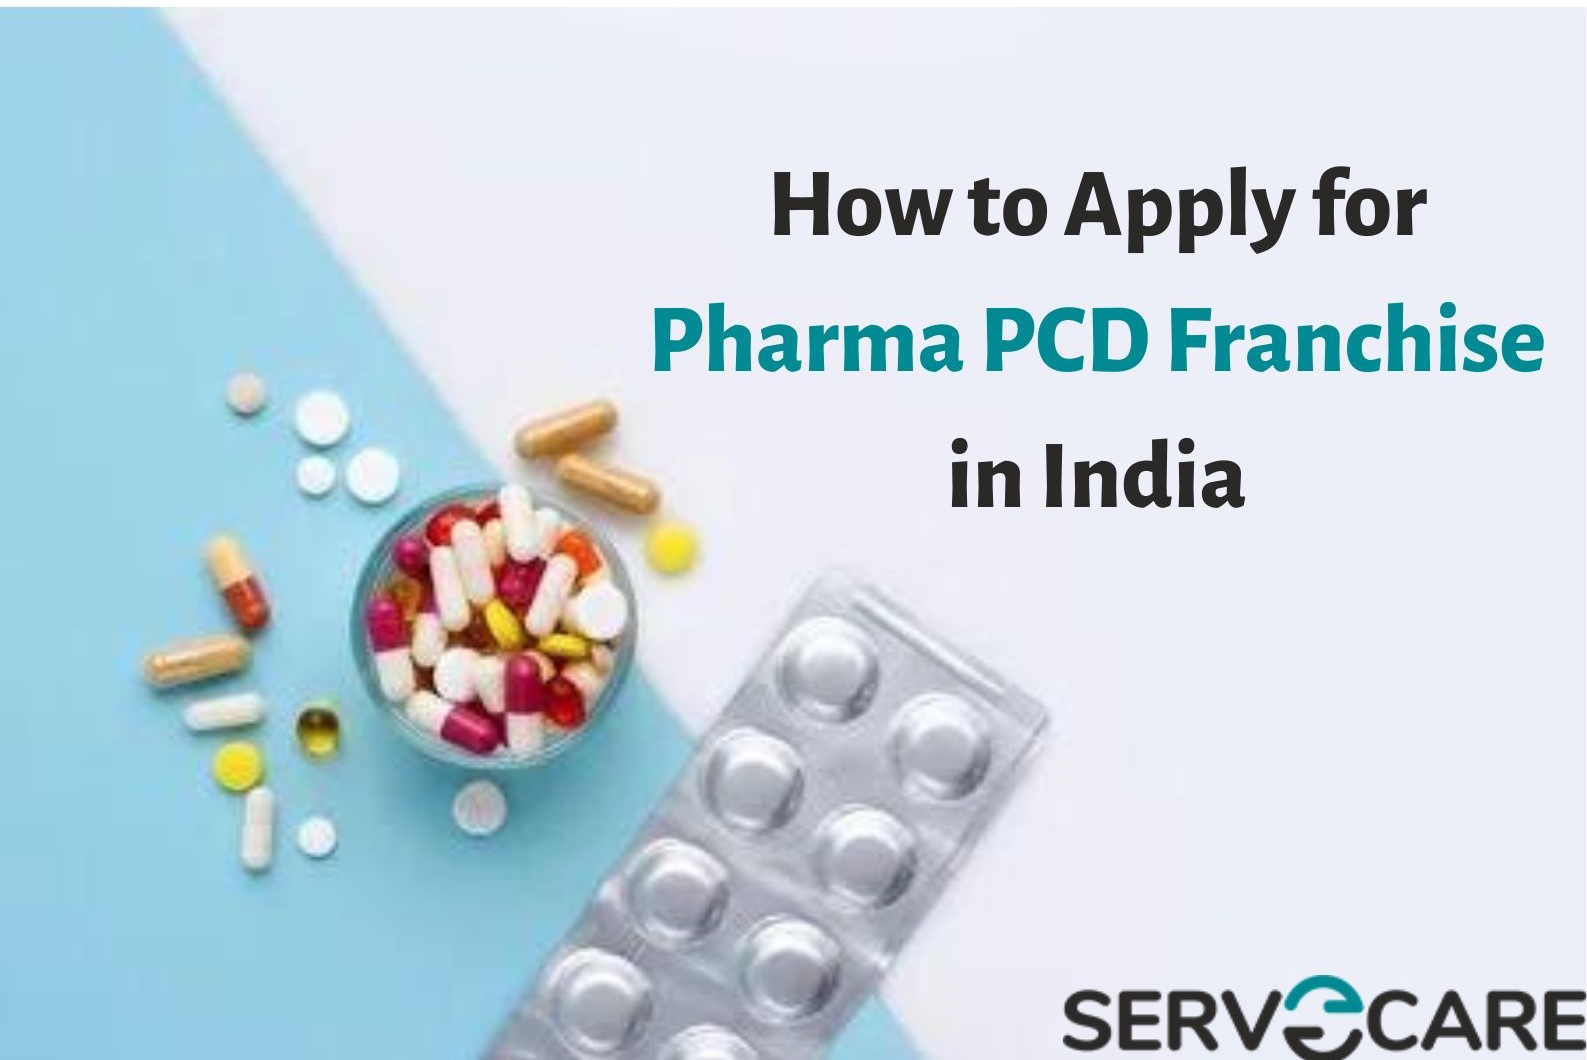 How to Apply for Pharma PCD Franchise in India